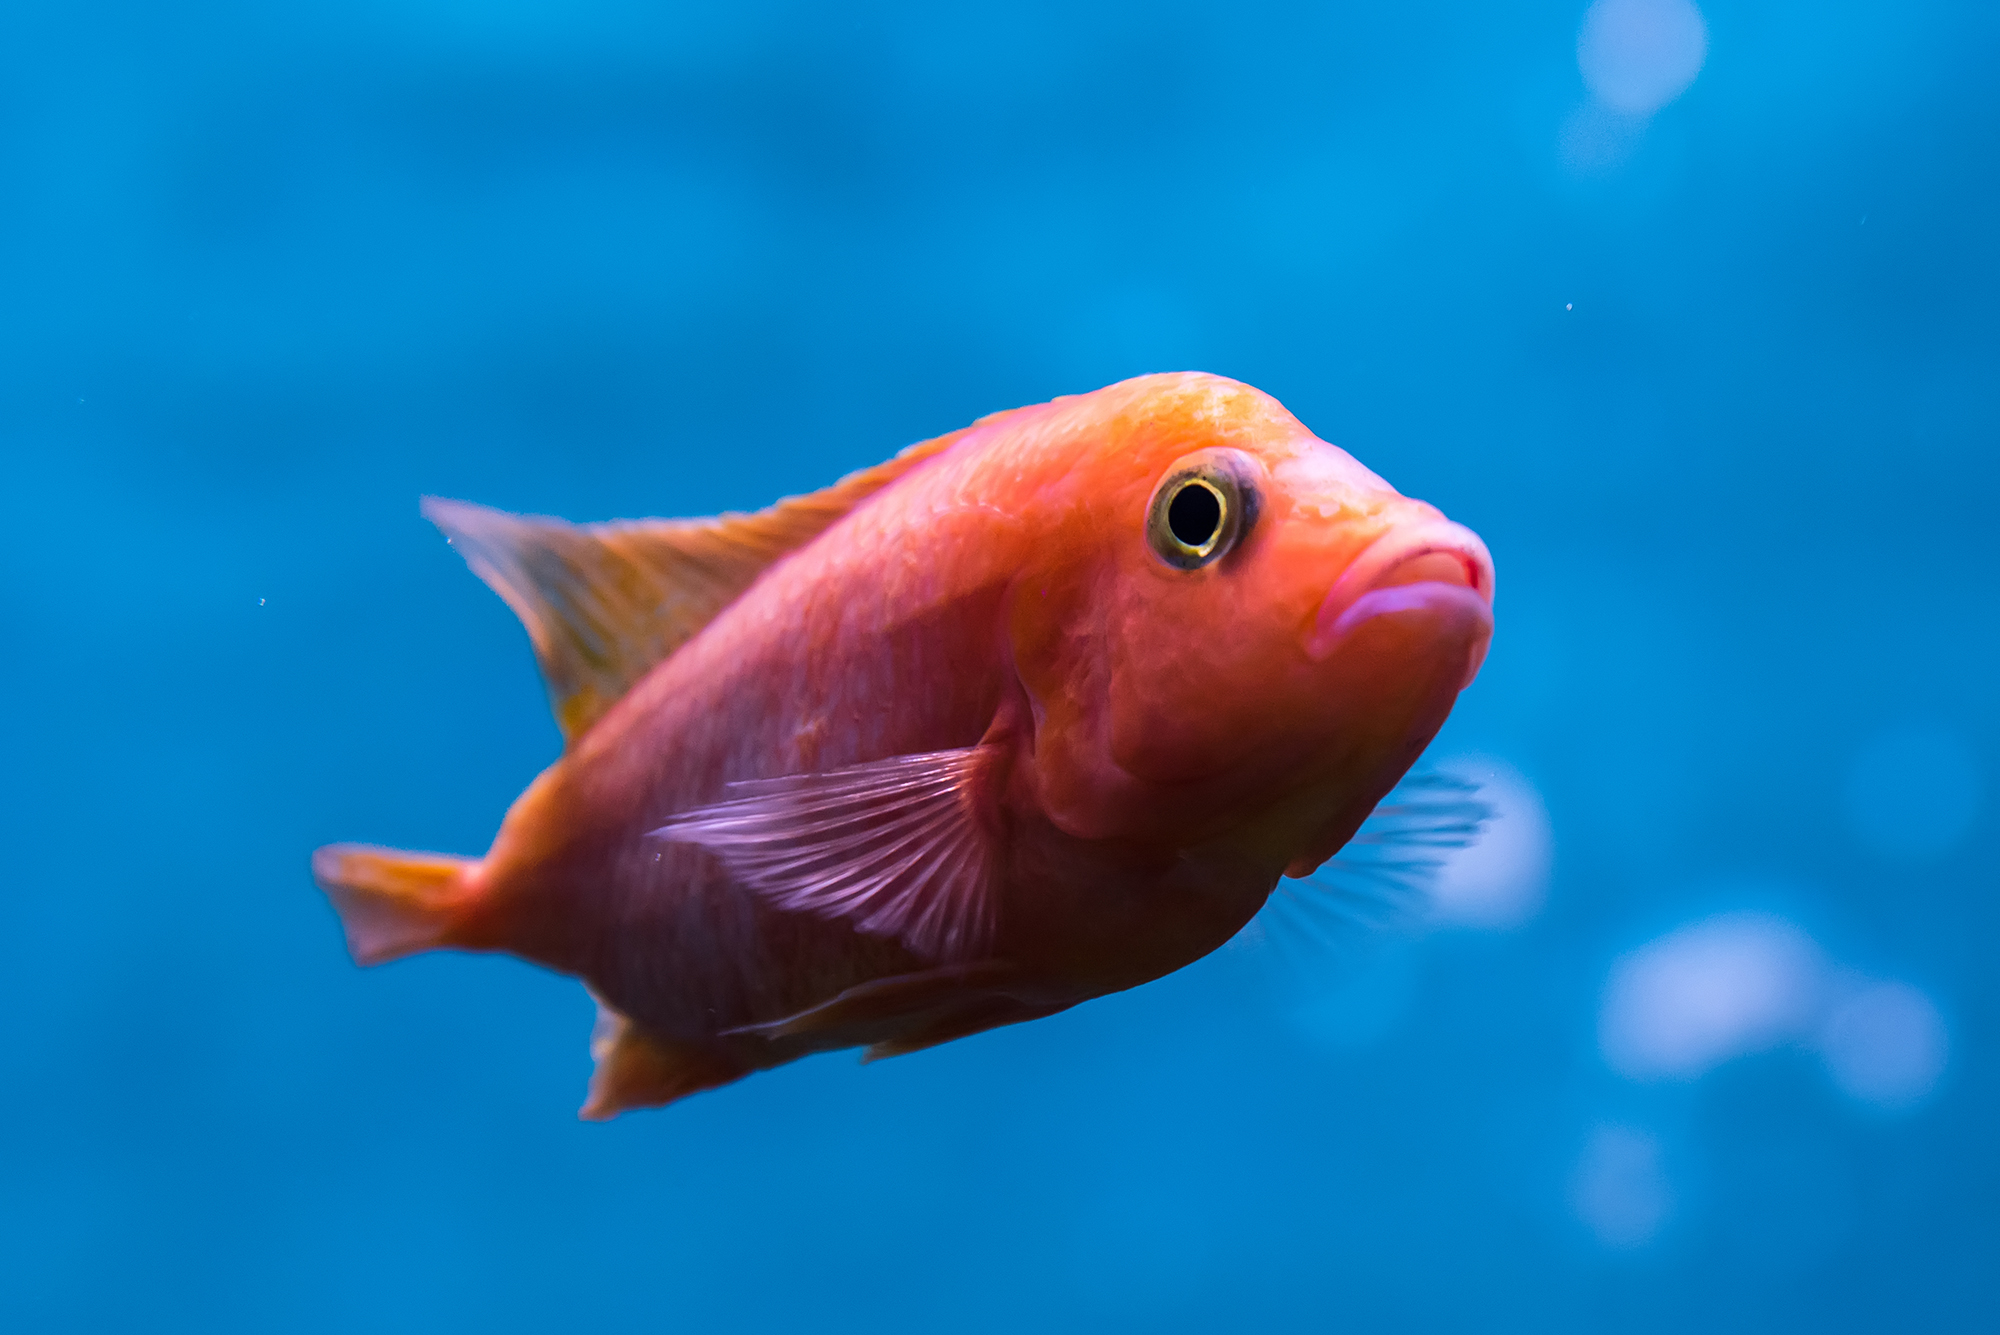 Fish With a Human-Like Face Becomes TikTok's New Obsession | Time